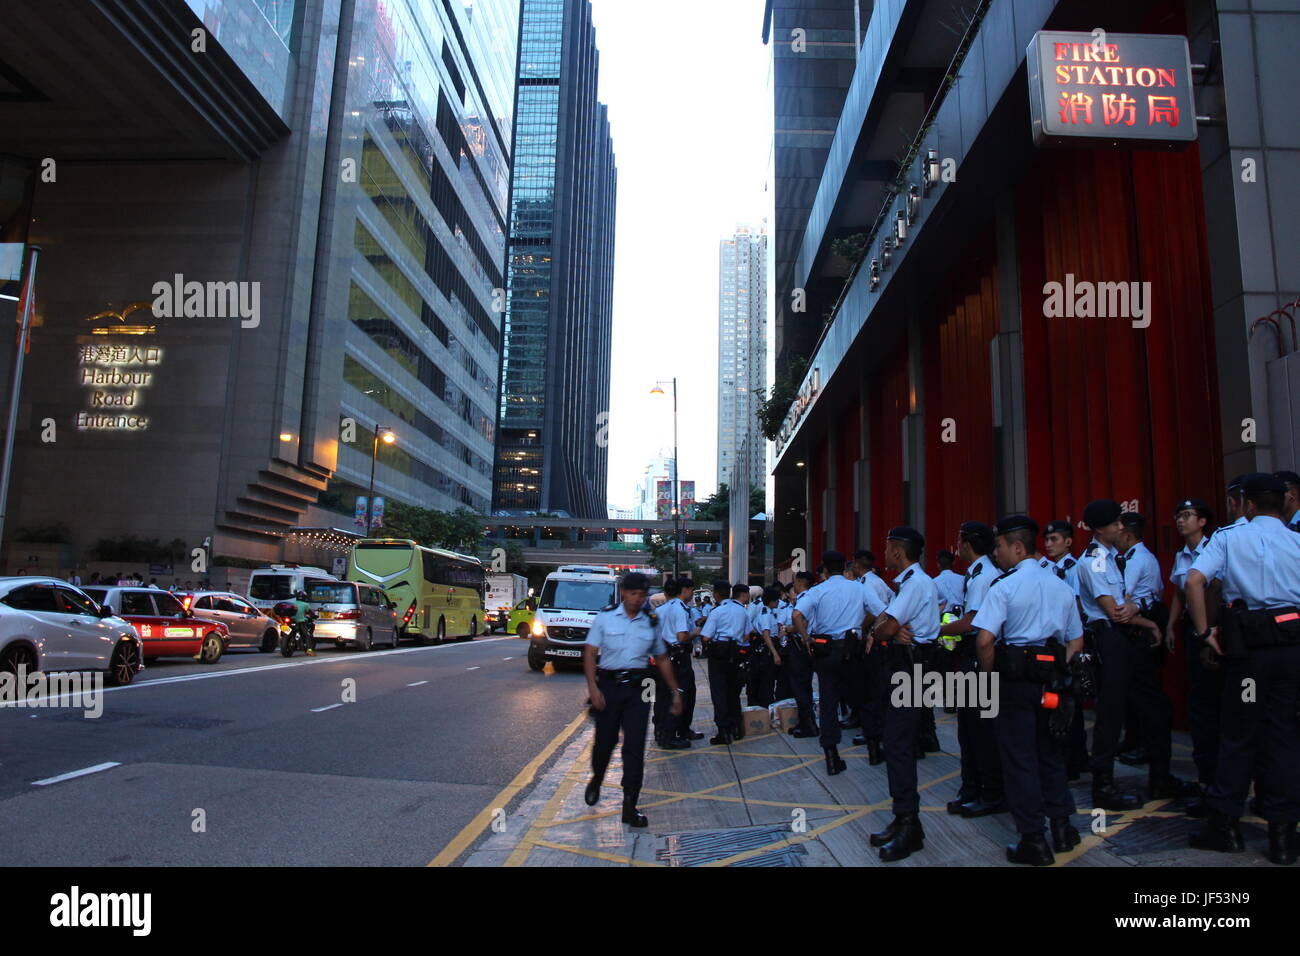 Heavy police presence on Harbour Road, Wanchai, guarding President Xi Jinping in the Convention and Exhibition Centre opposite the fire station Stock Photo